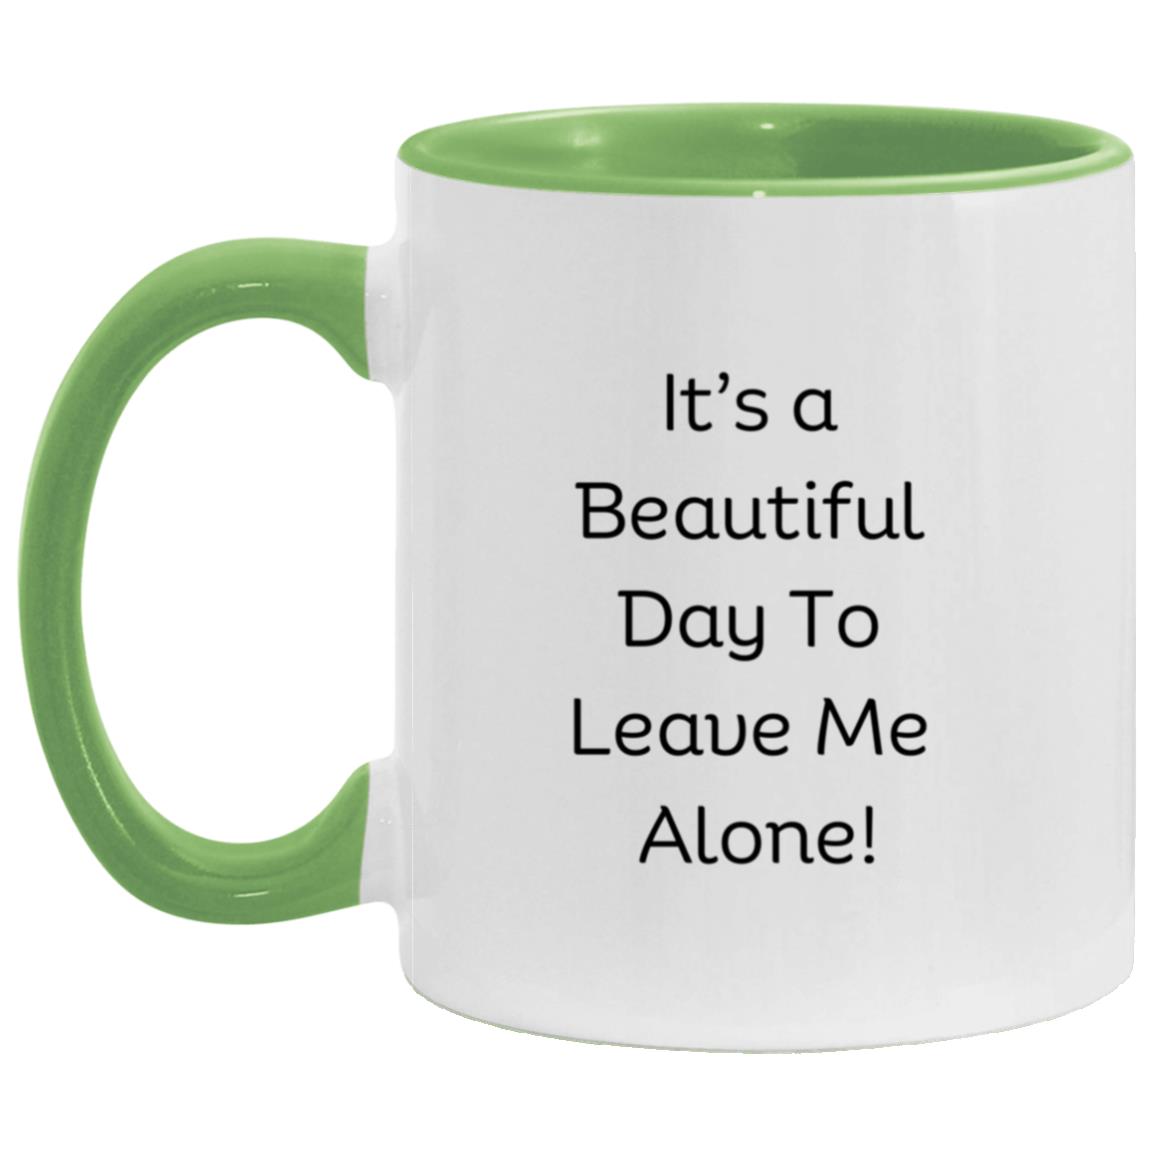 It's a beautiful day to leave me alone Mug | Mother's Day Gift| For Mom| Partner| Girlfriend| Wife| Trending| Co-Worker